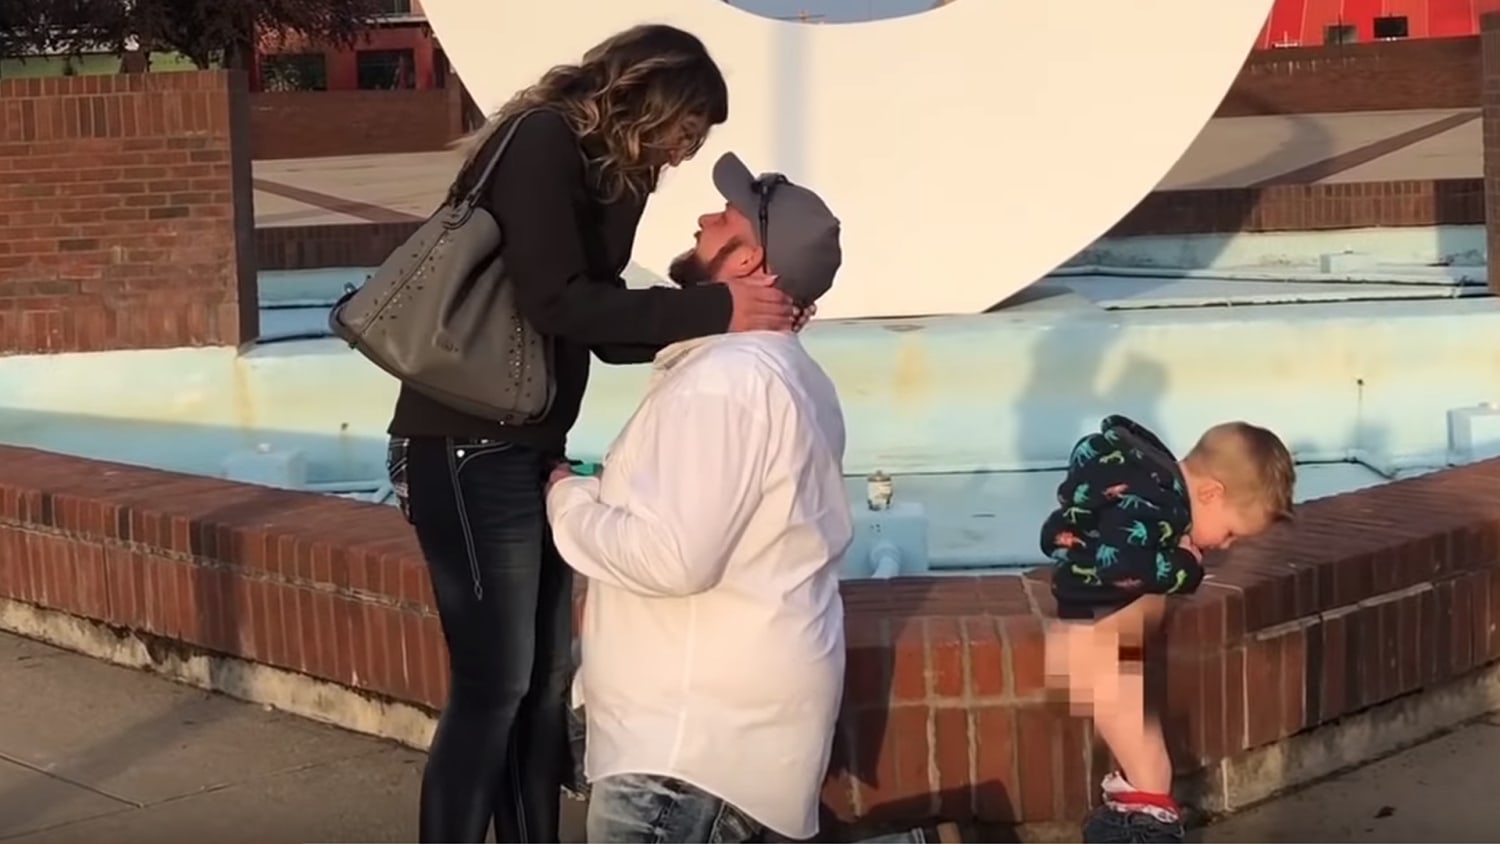 Video shows kid peeing during moms marriage proposal image